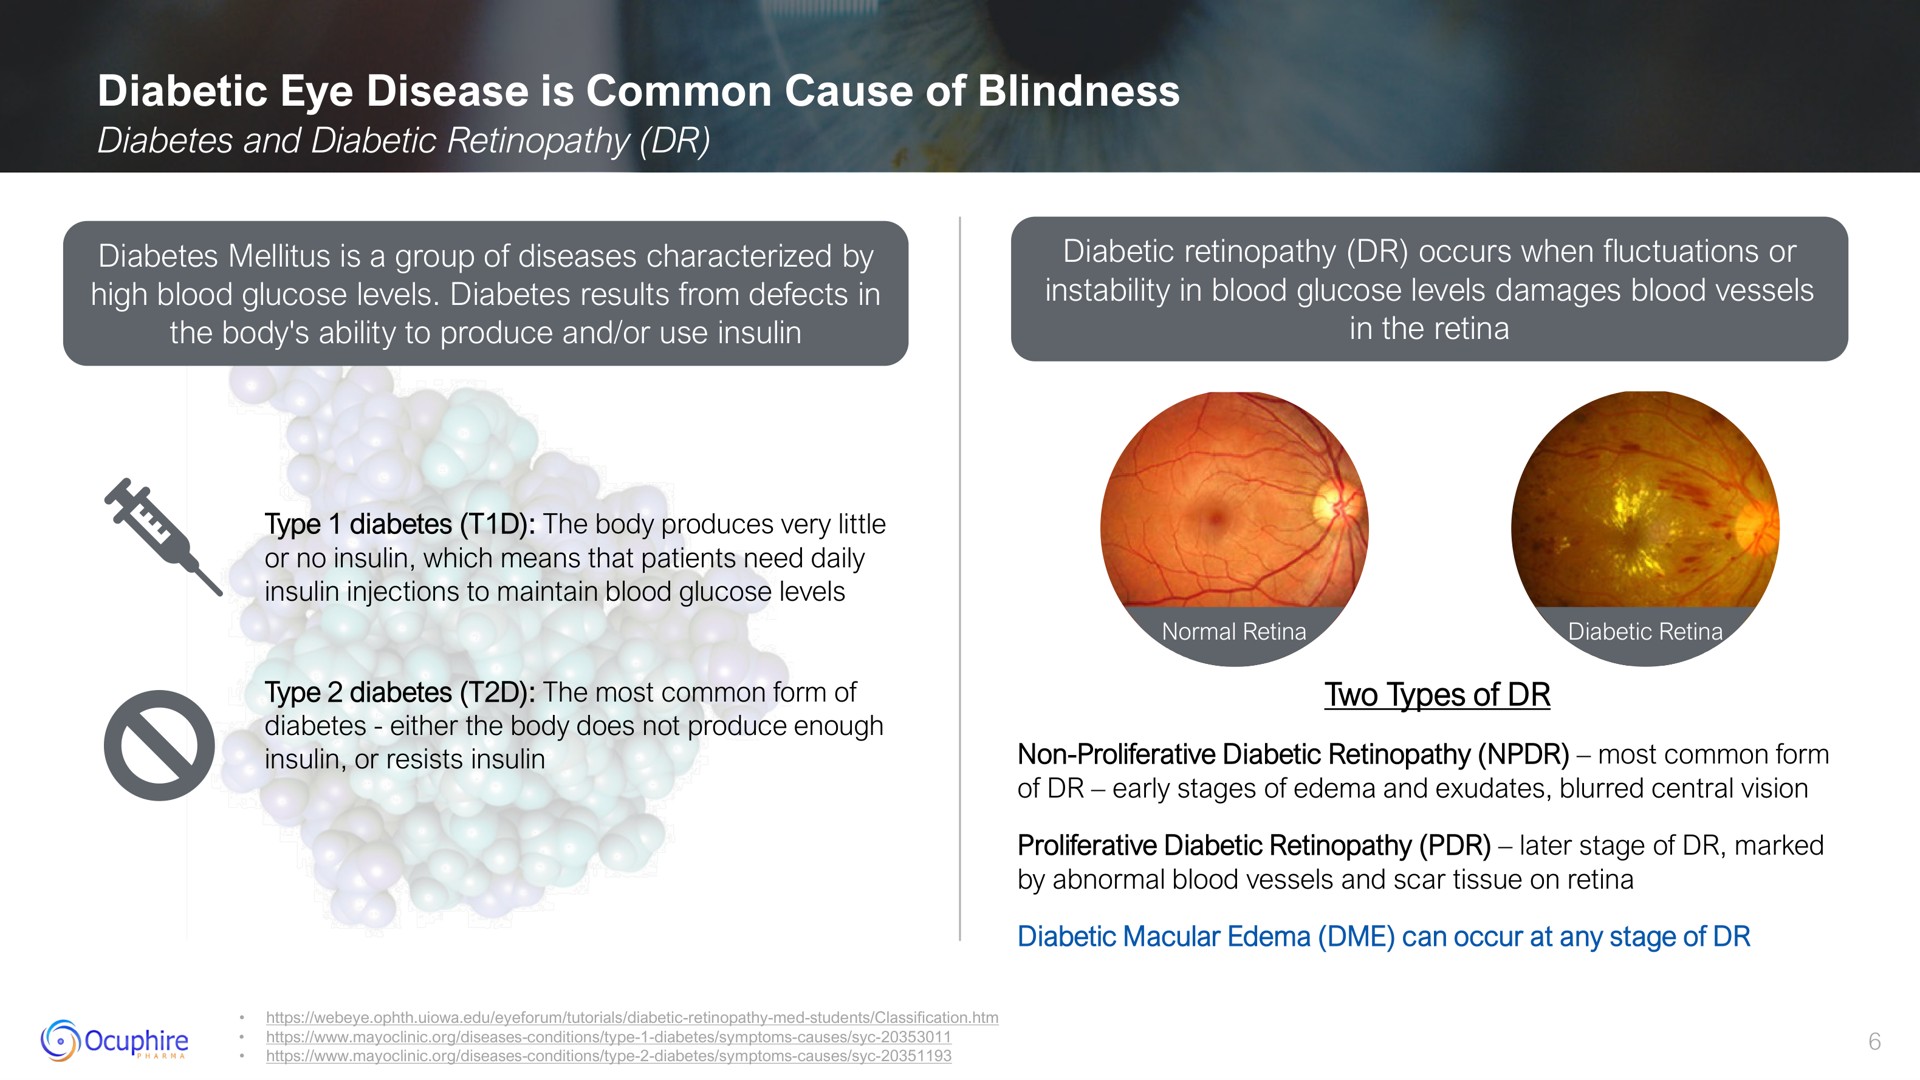 diabetic eye disease is common cause of blindness diabetes a group diseases characterized by occurs when fluctuations or | Ocuphire Pharma